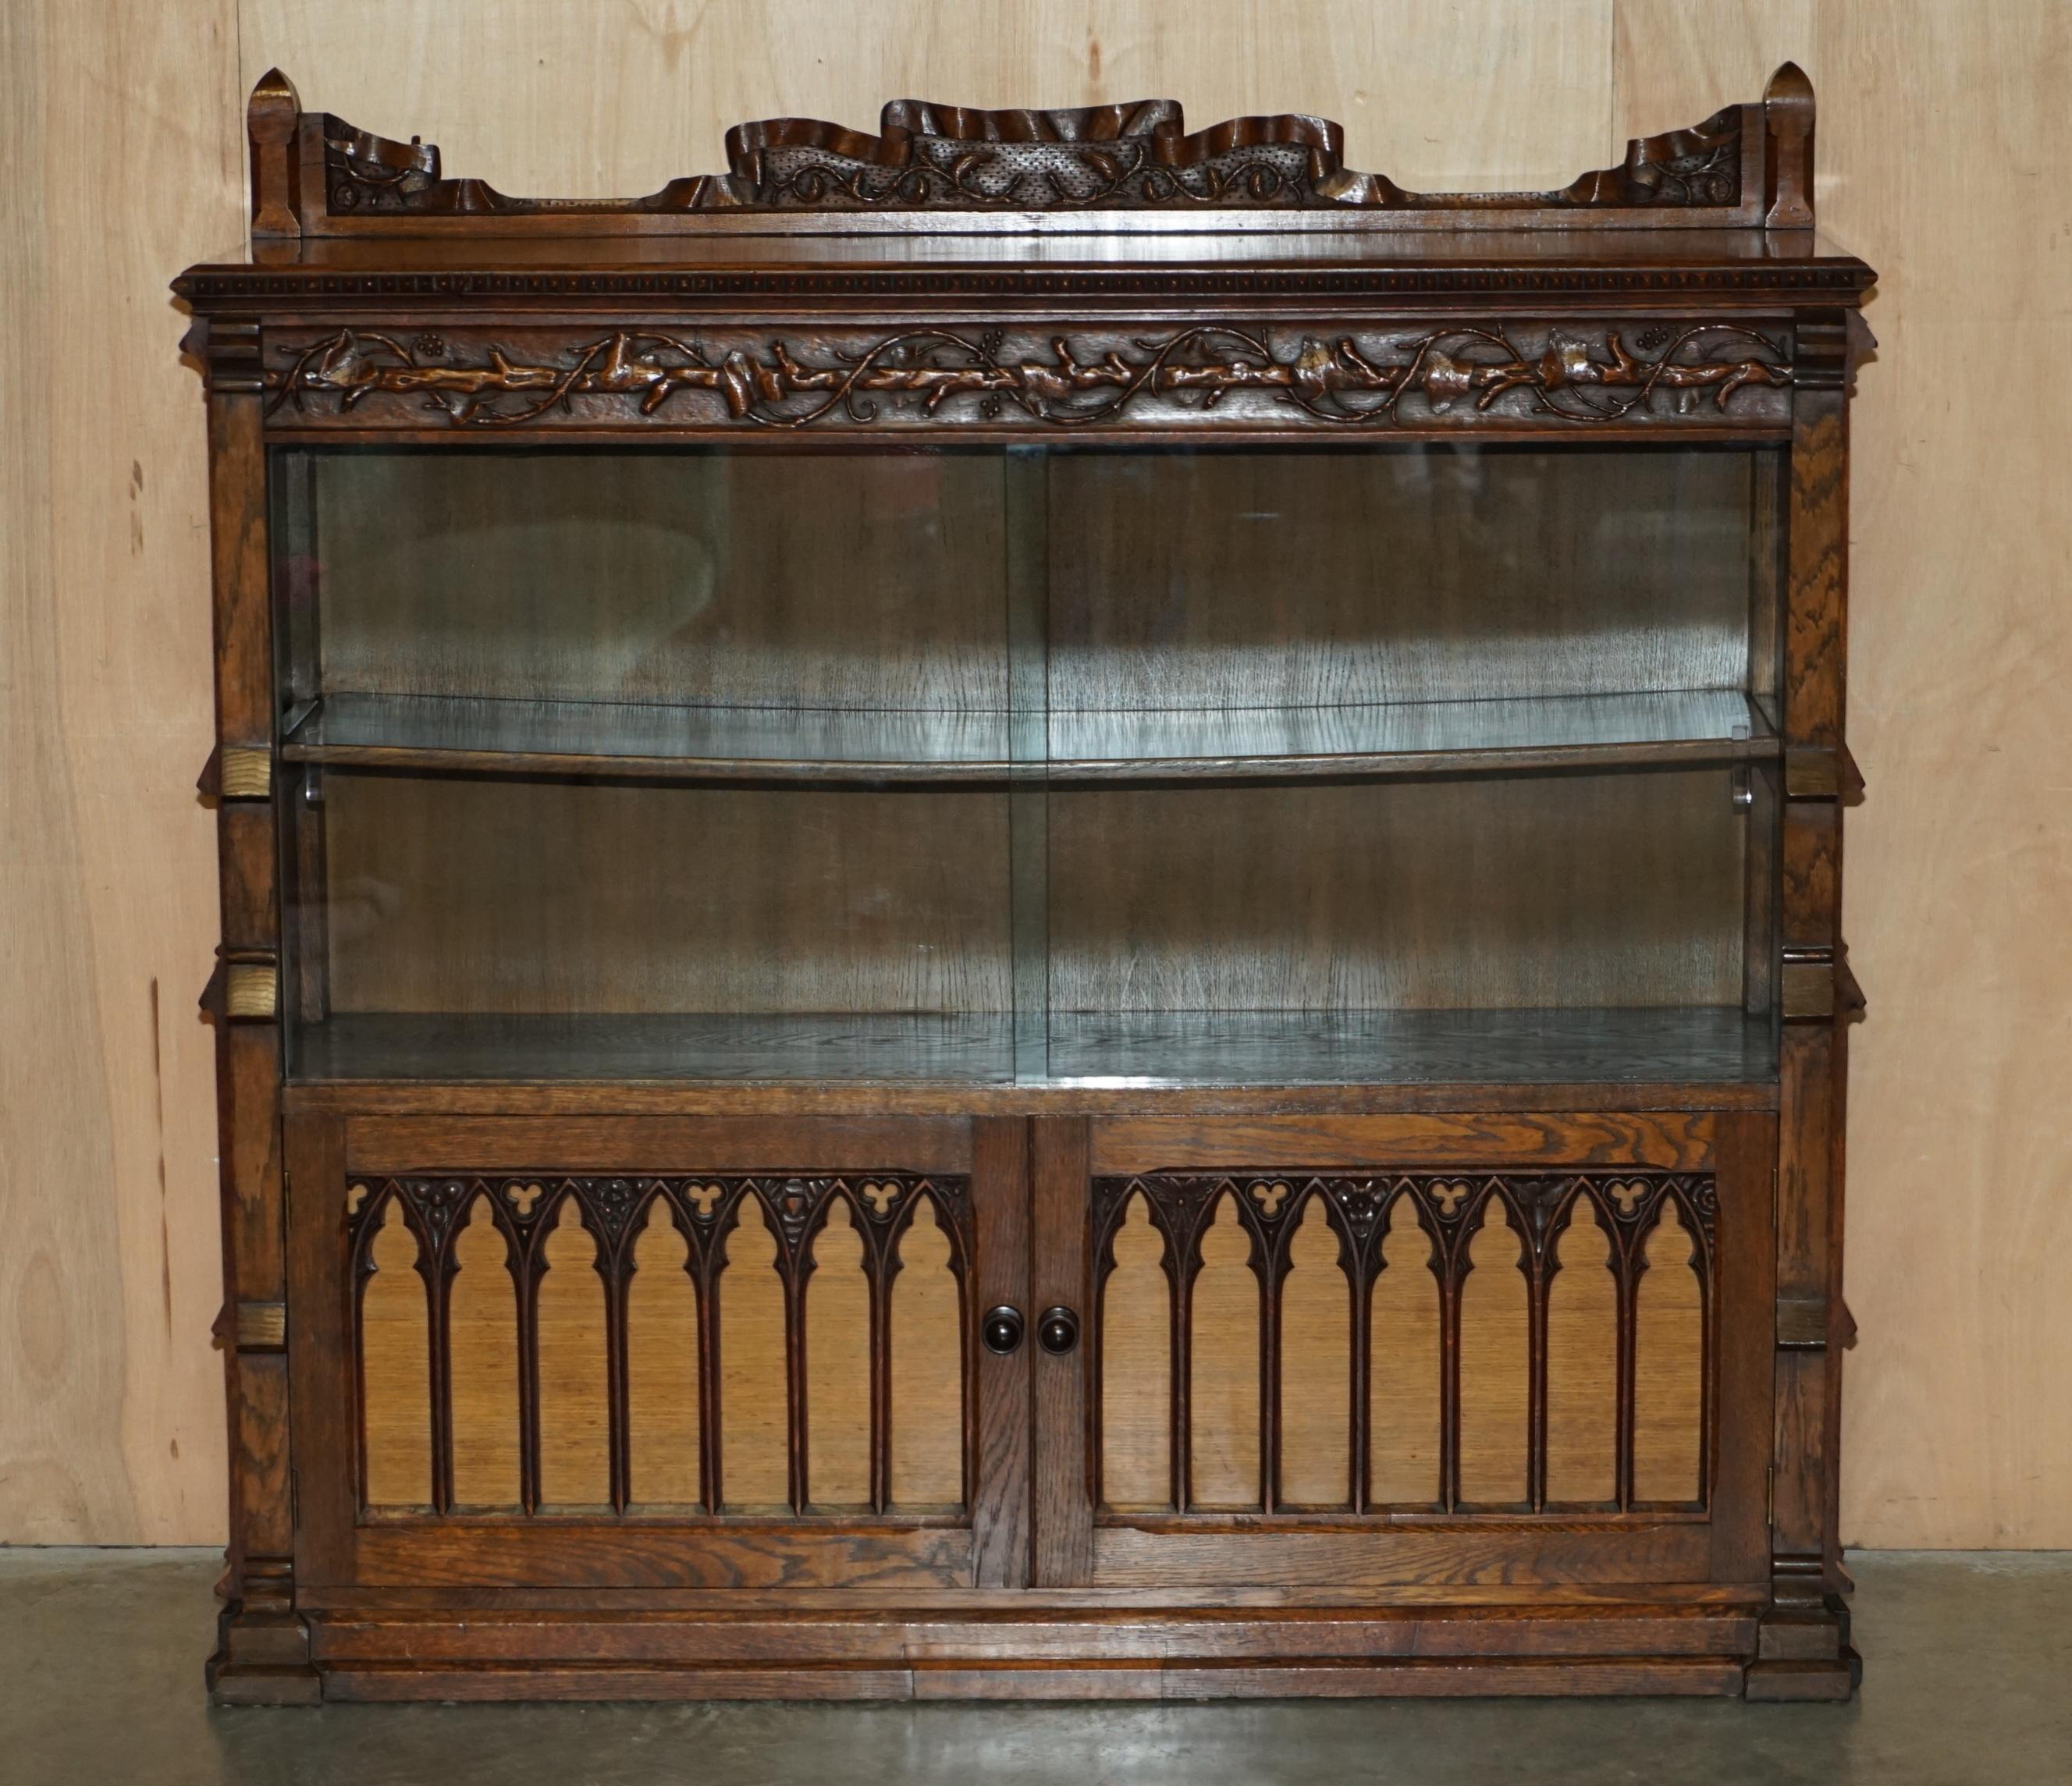 Royal House Antiques

Royal House Antiques is delighted to offer for this really quite stunning Antique circa 1860-1880 Gothic Revival Pugin style bookcase which is wonderfully carved all over as you can see in the pictures 

Please note the